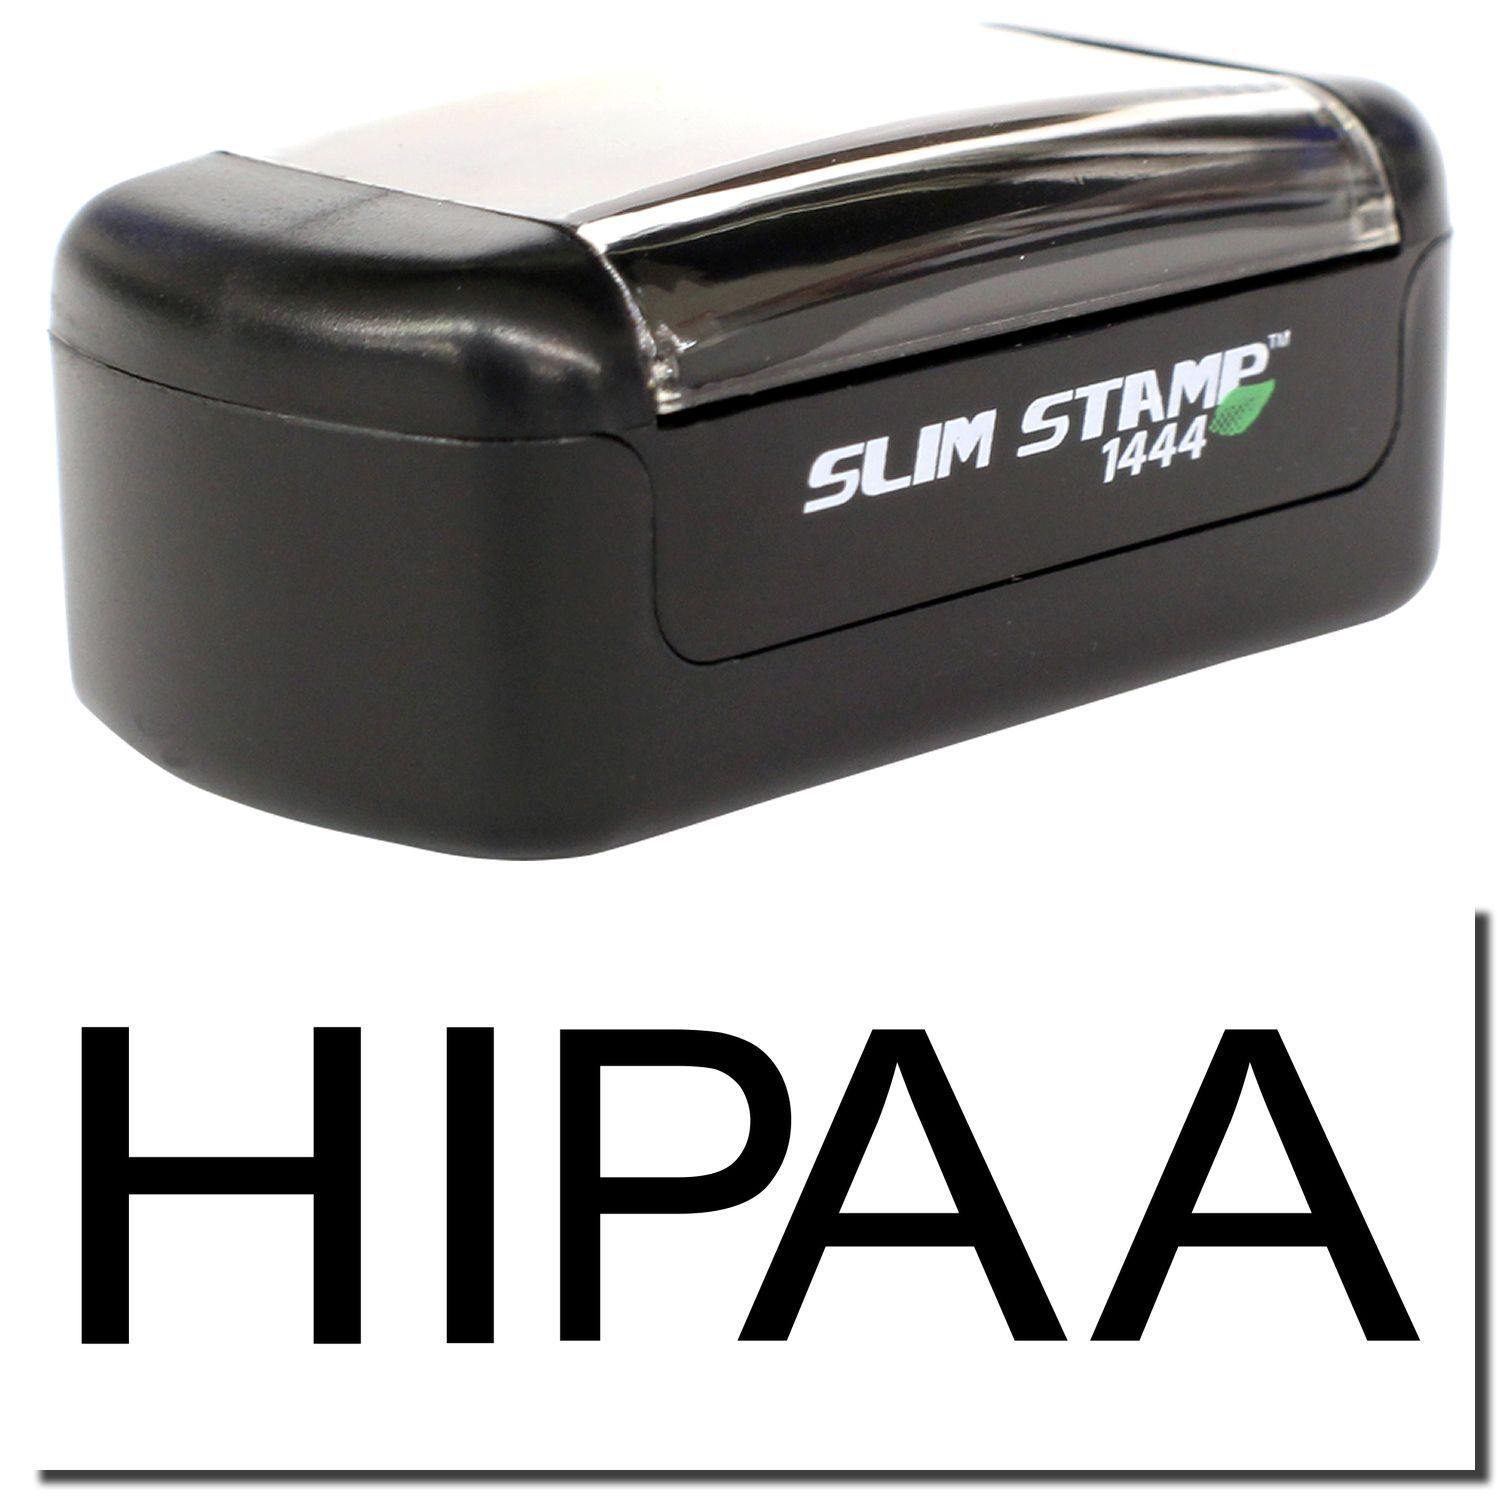 A stock office pre-inked stamp with a stamped image showing how the text "HIPAA" is displayed after stamping.